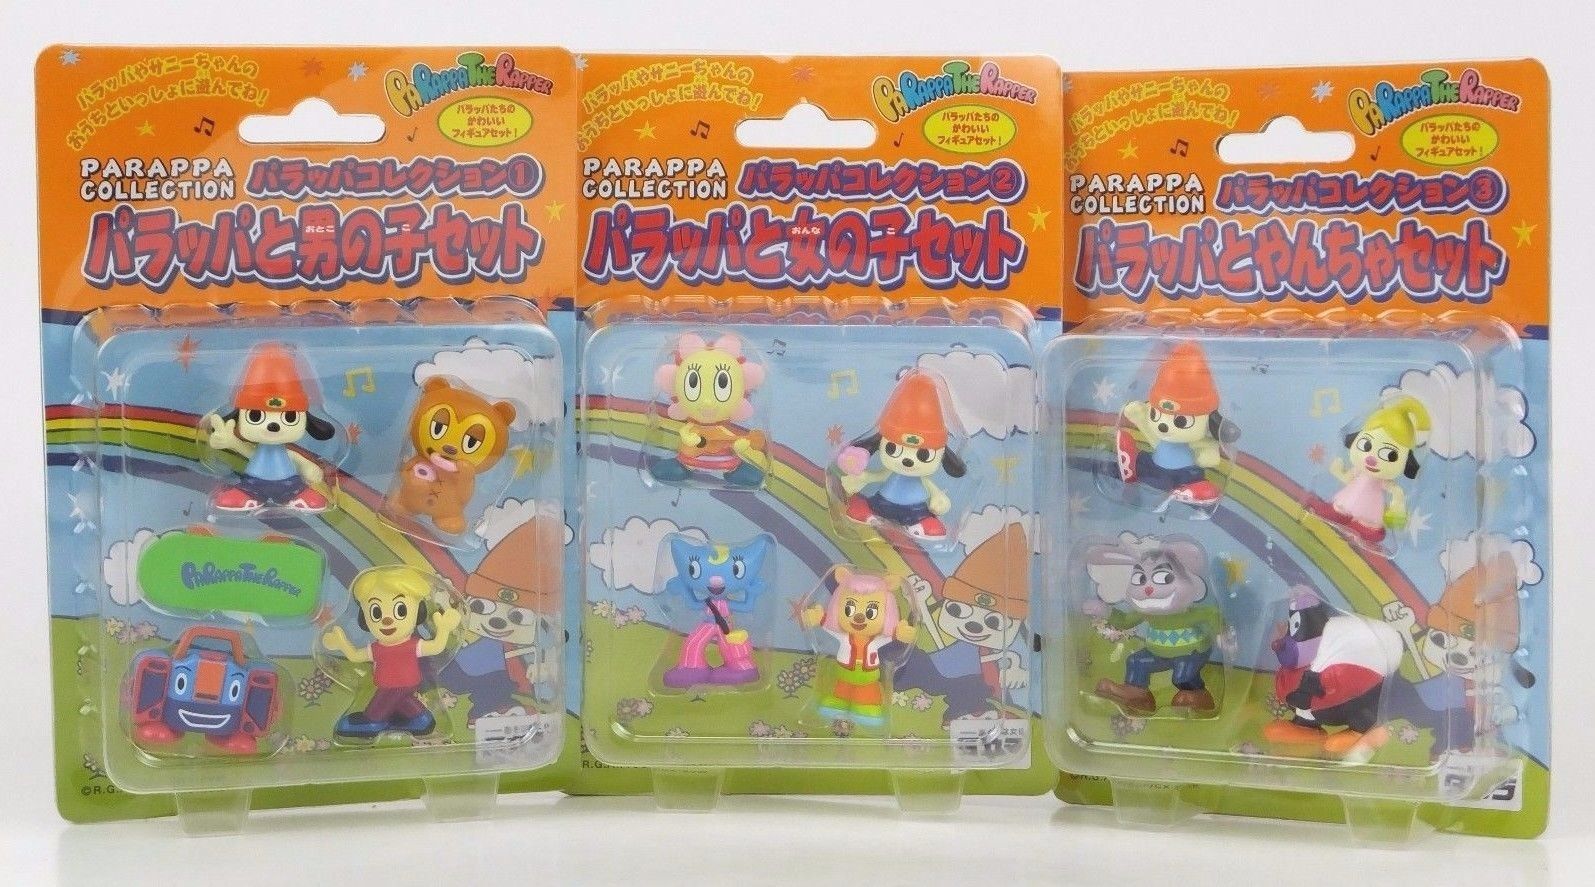 RARE! Parappa The Rapper Space Age Printing Toaster JAPAN ANIME GAME